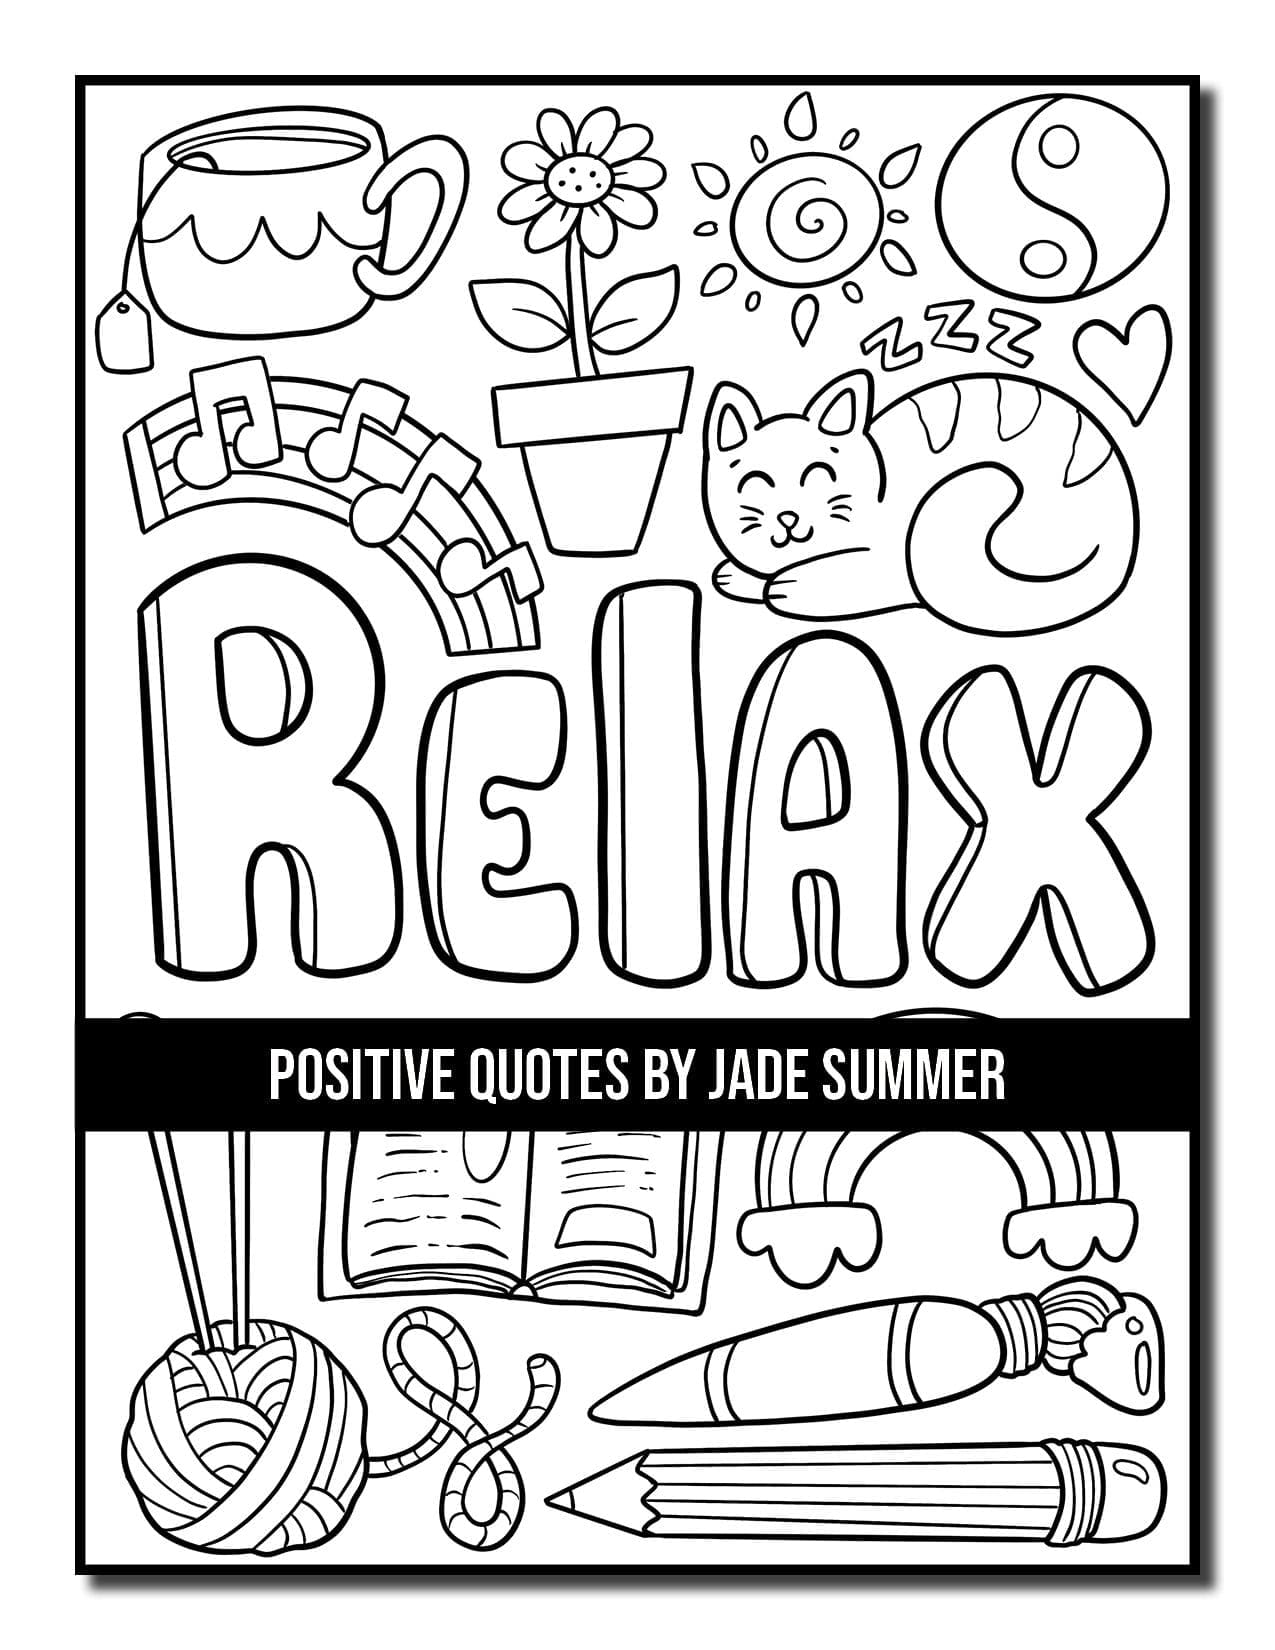 Positive Quotes Coloring Book | Jade Summer